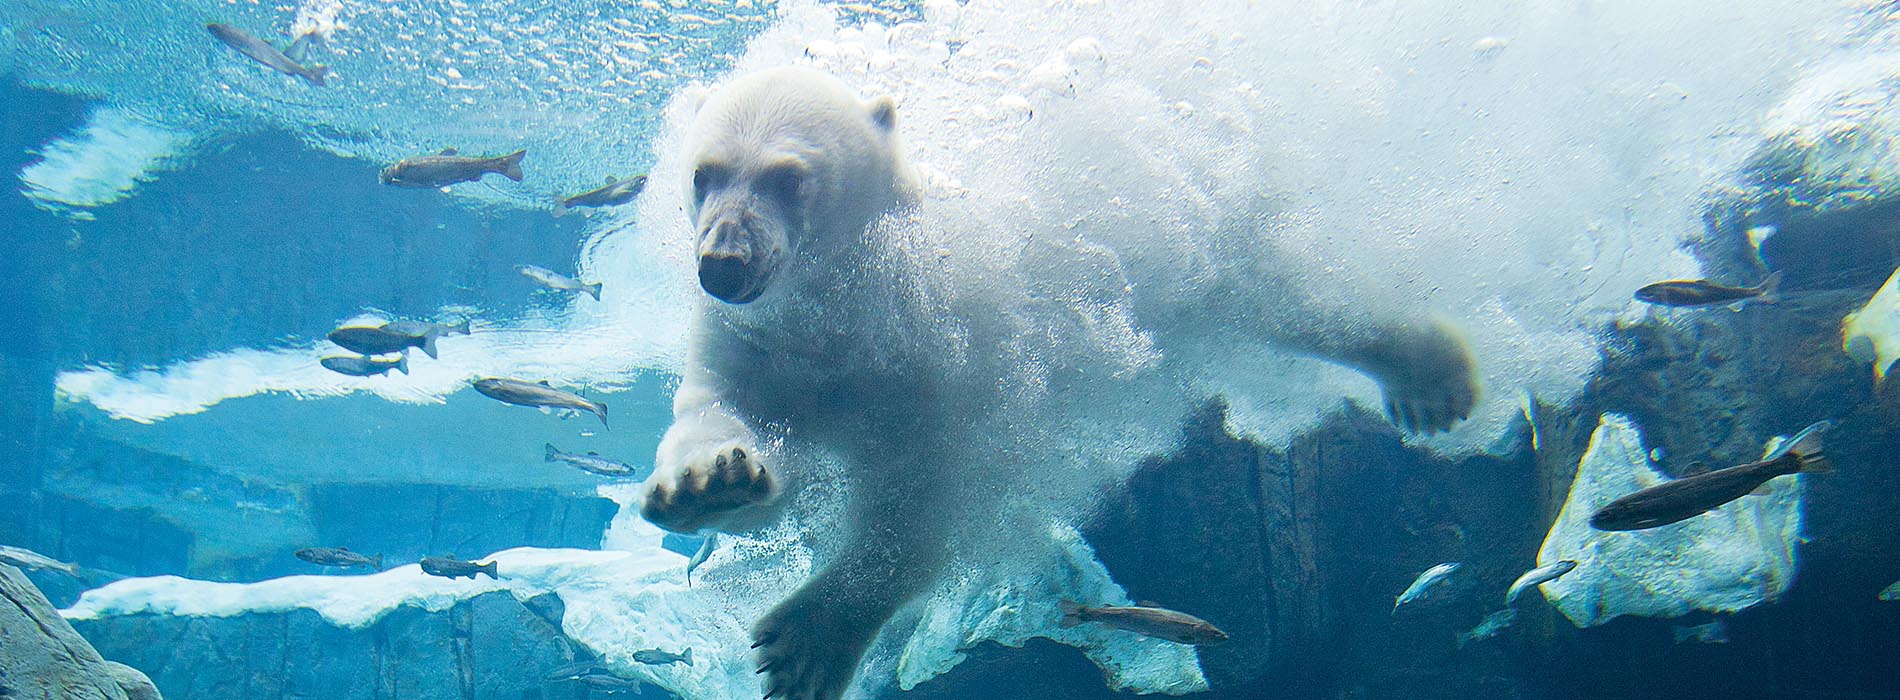 An adult polar bear plunges into water where fish are swimming